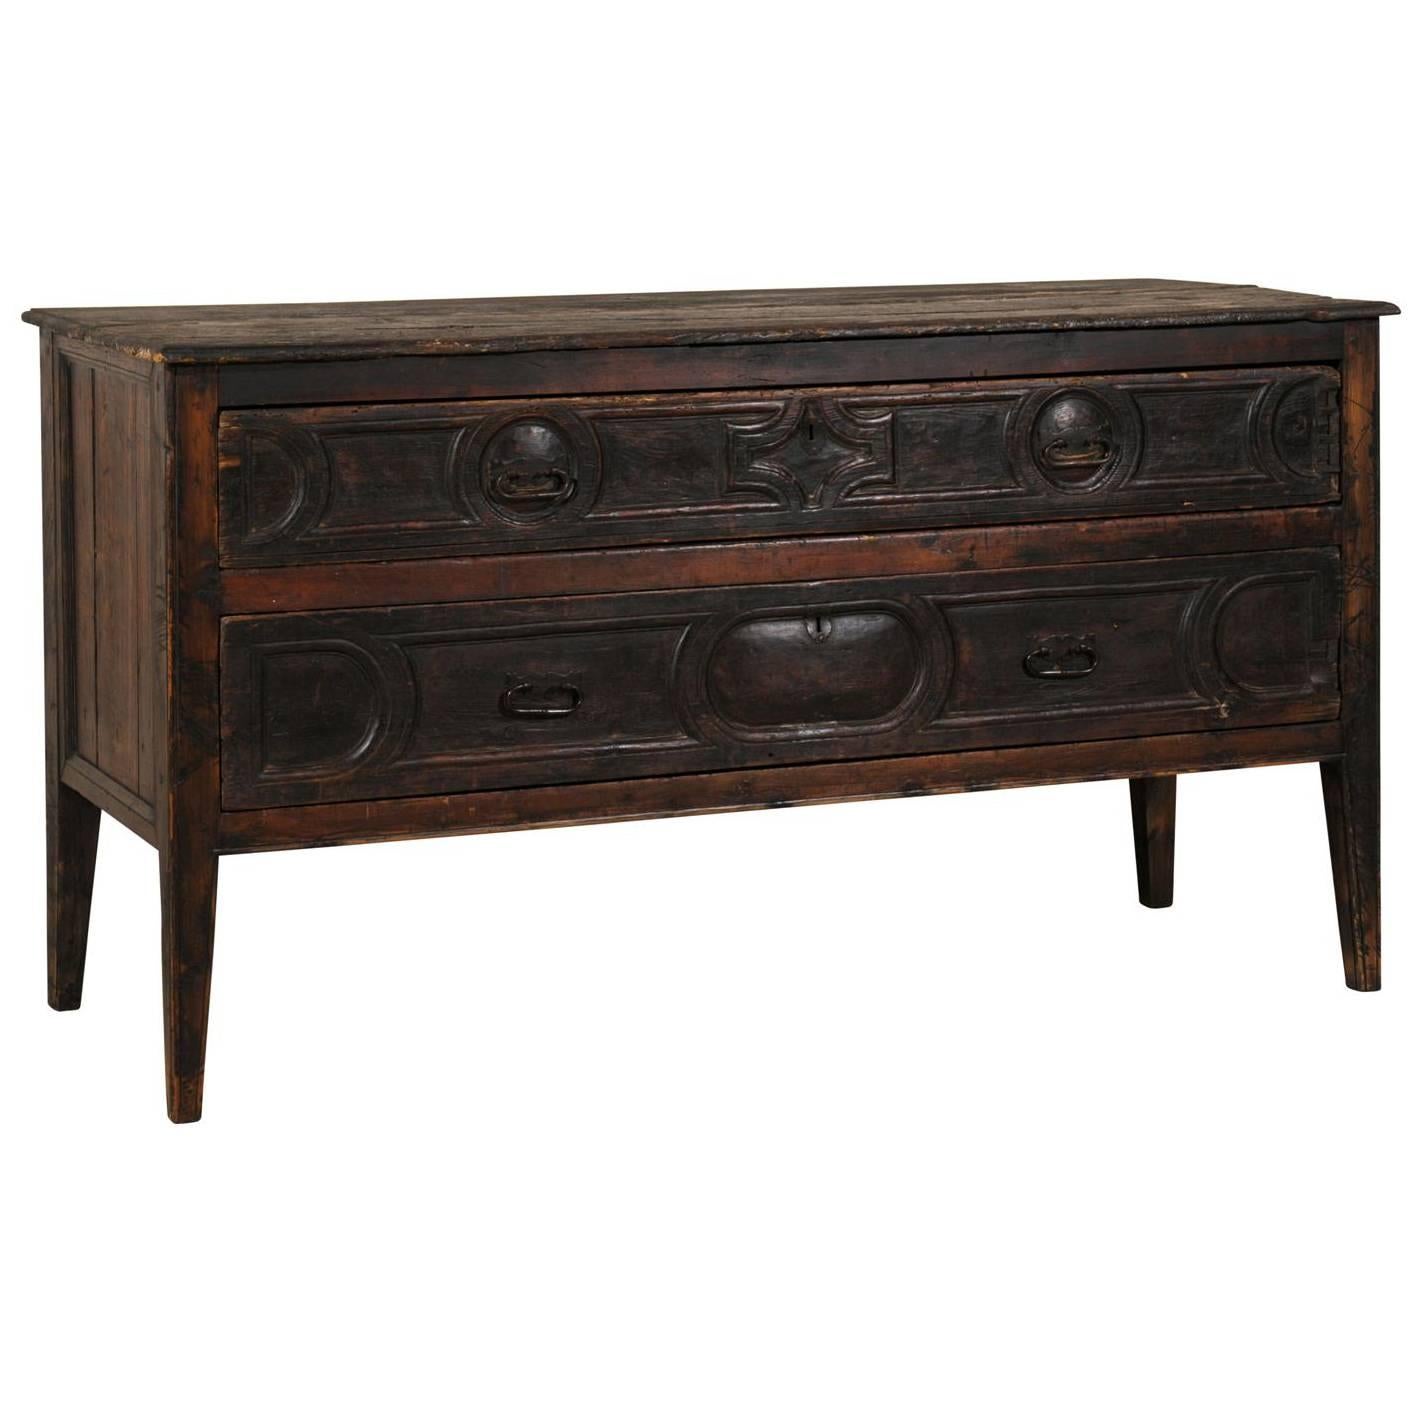 Grand 18th Century Spanish Two-Drawer Console Table/Server